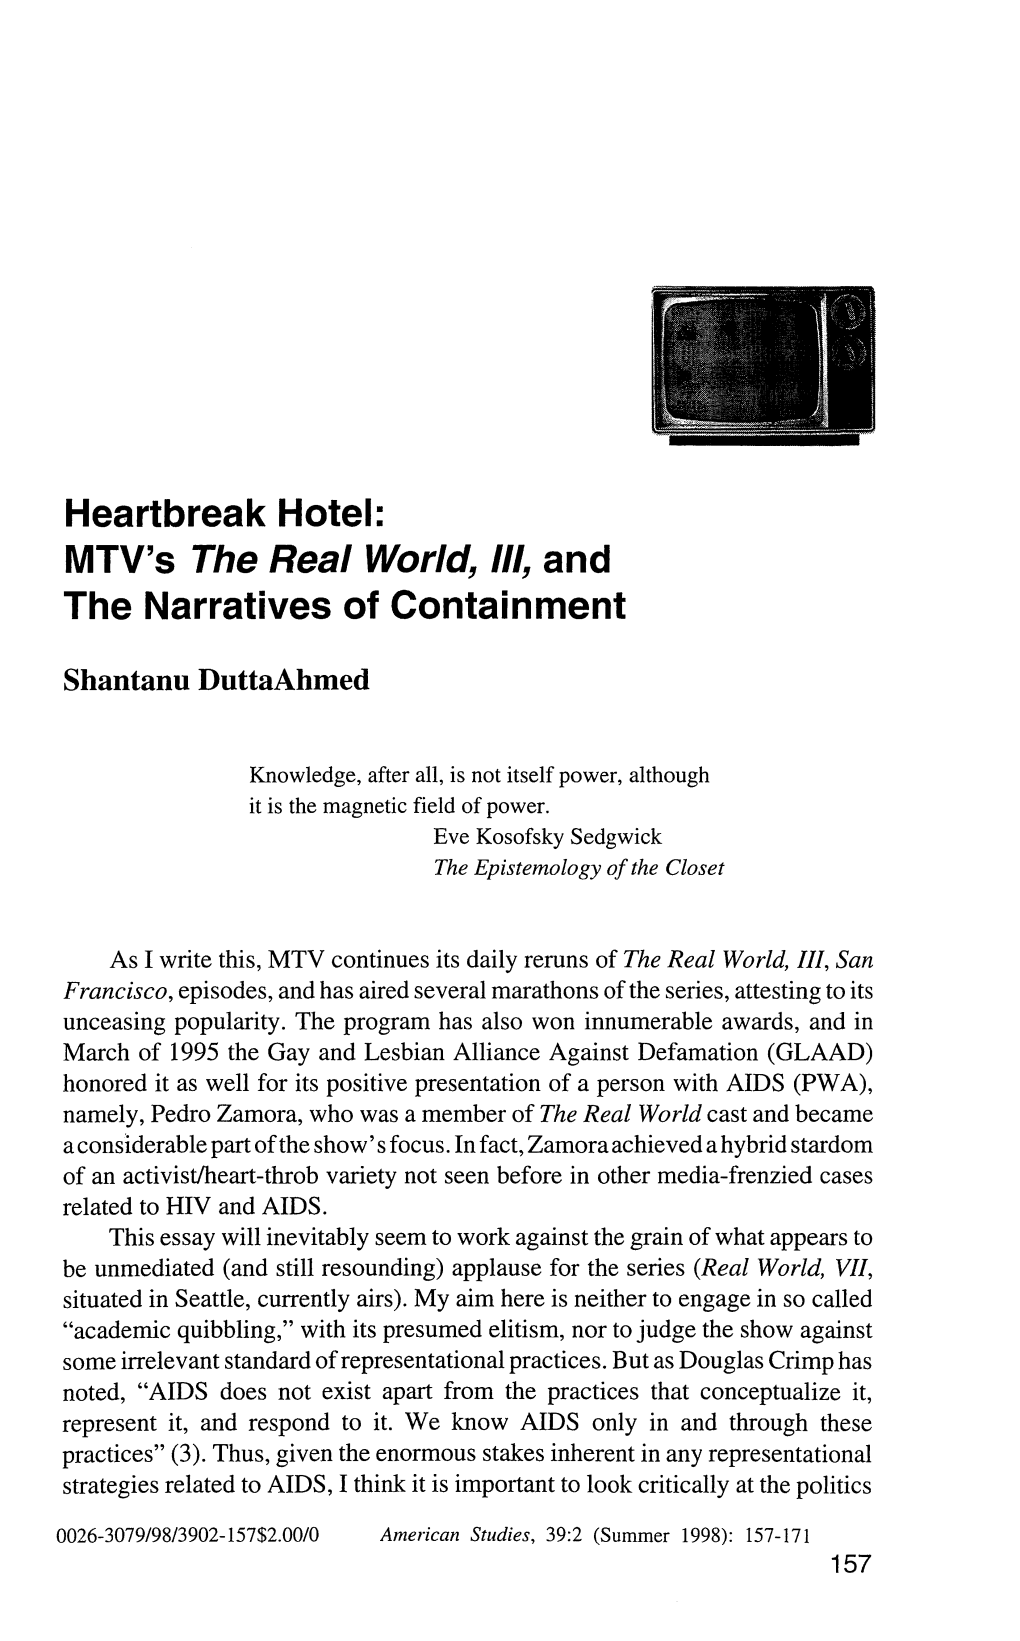 Heartbreak Hotel: MTV's the Real World, III, and the Narratives of Containment